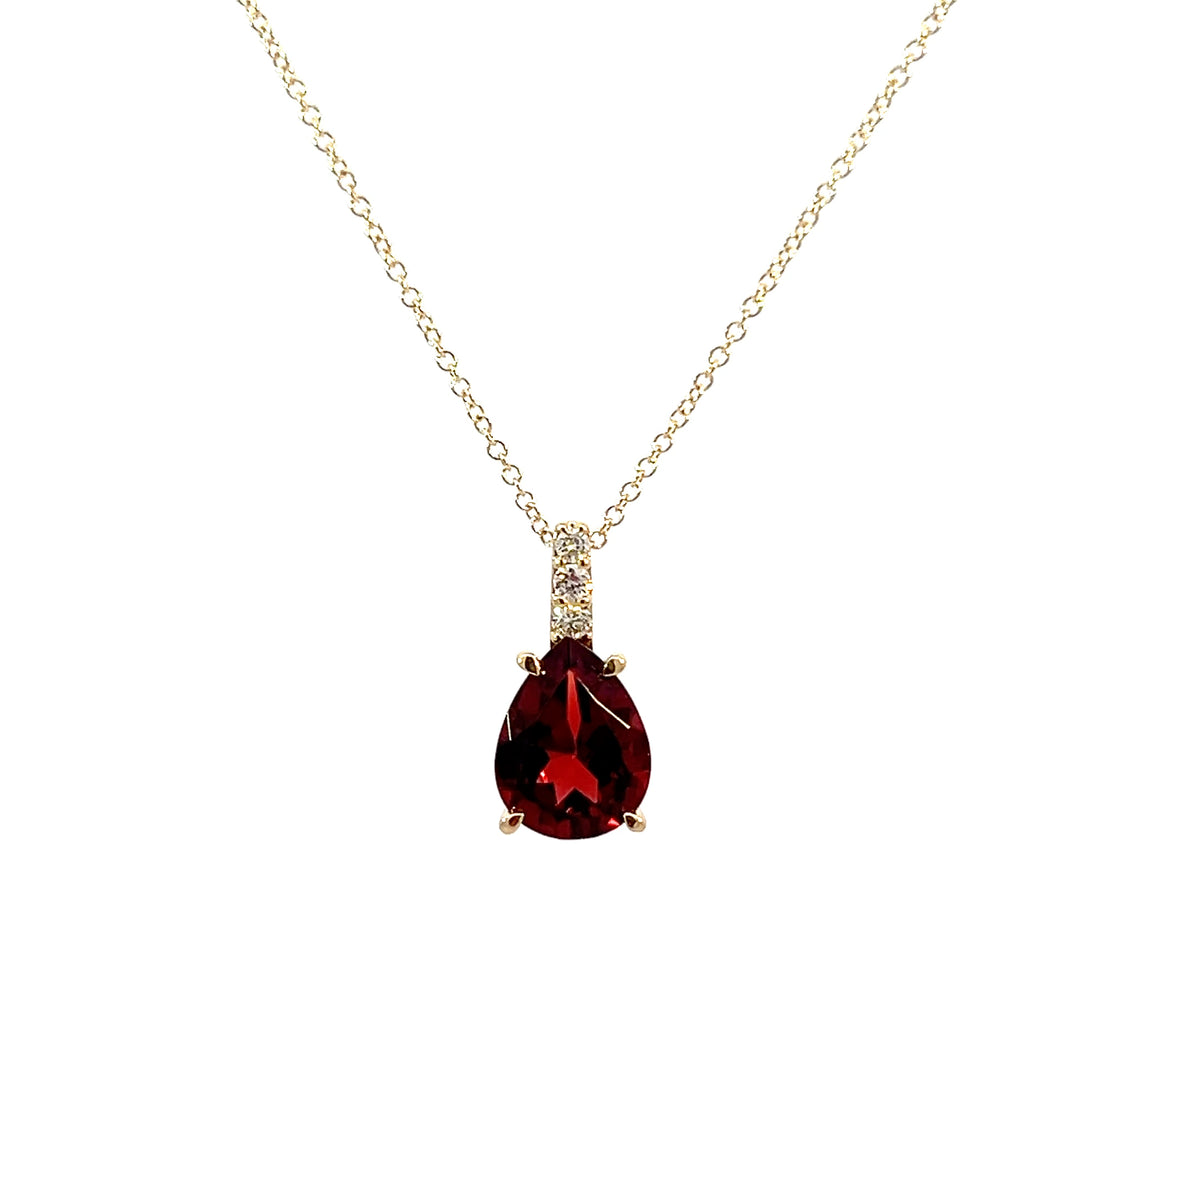 10K Yellow Gold 2.0cttw Garnet and 0.059cttw Diamond Pendant with Rolo Chain - 18 Inches